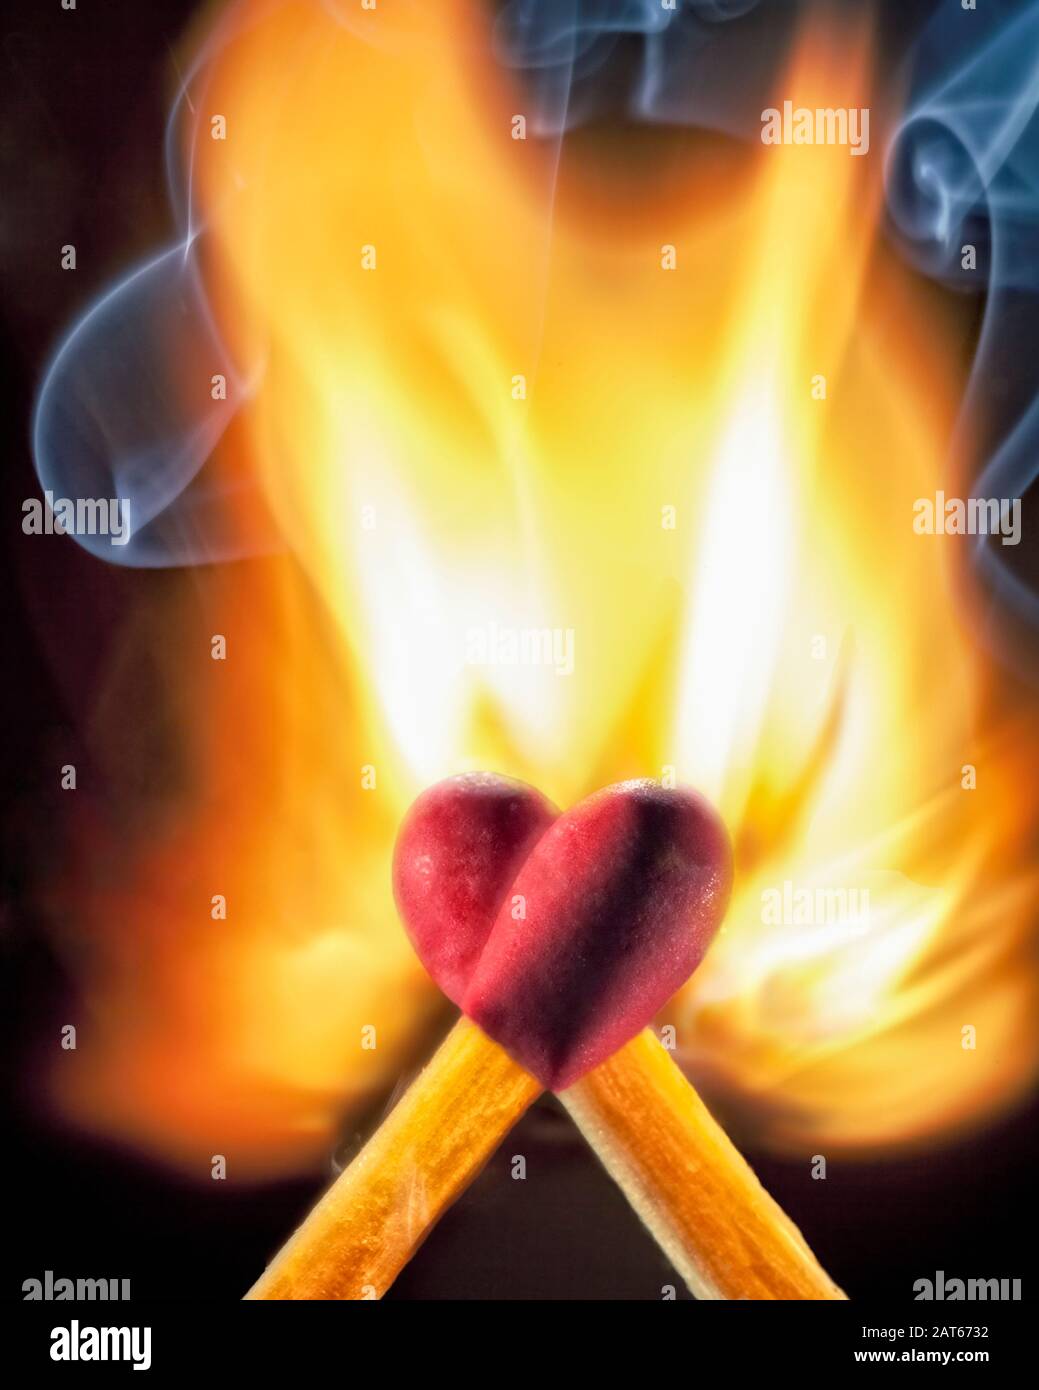 Two wooden matchsticks with red tips overlap to form a heart-shape as they ignite into flames Stock Photo